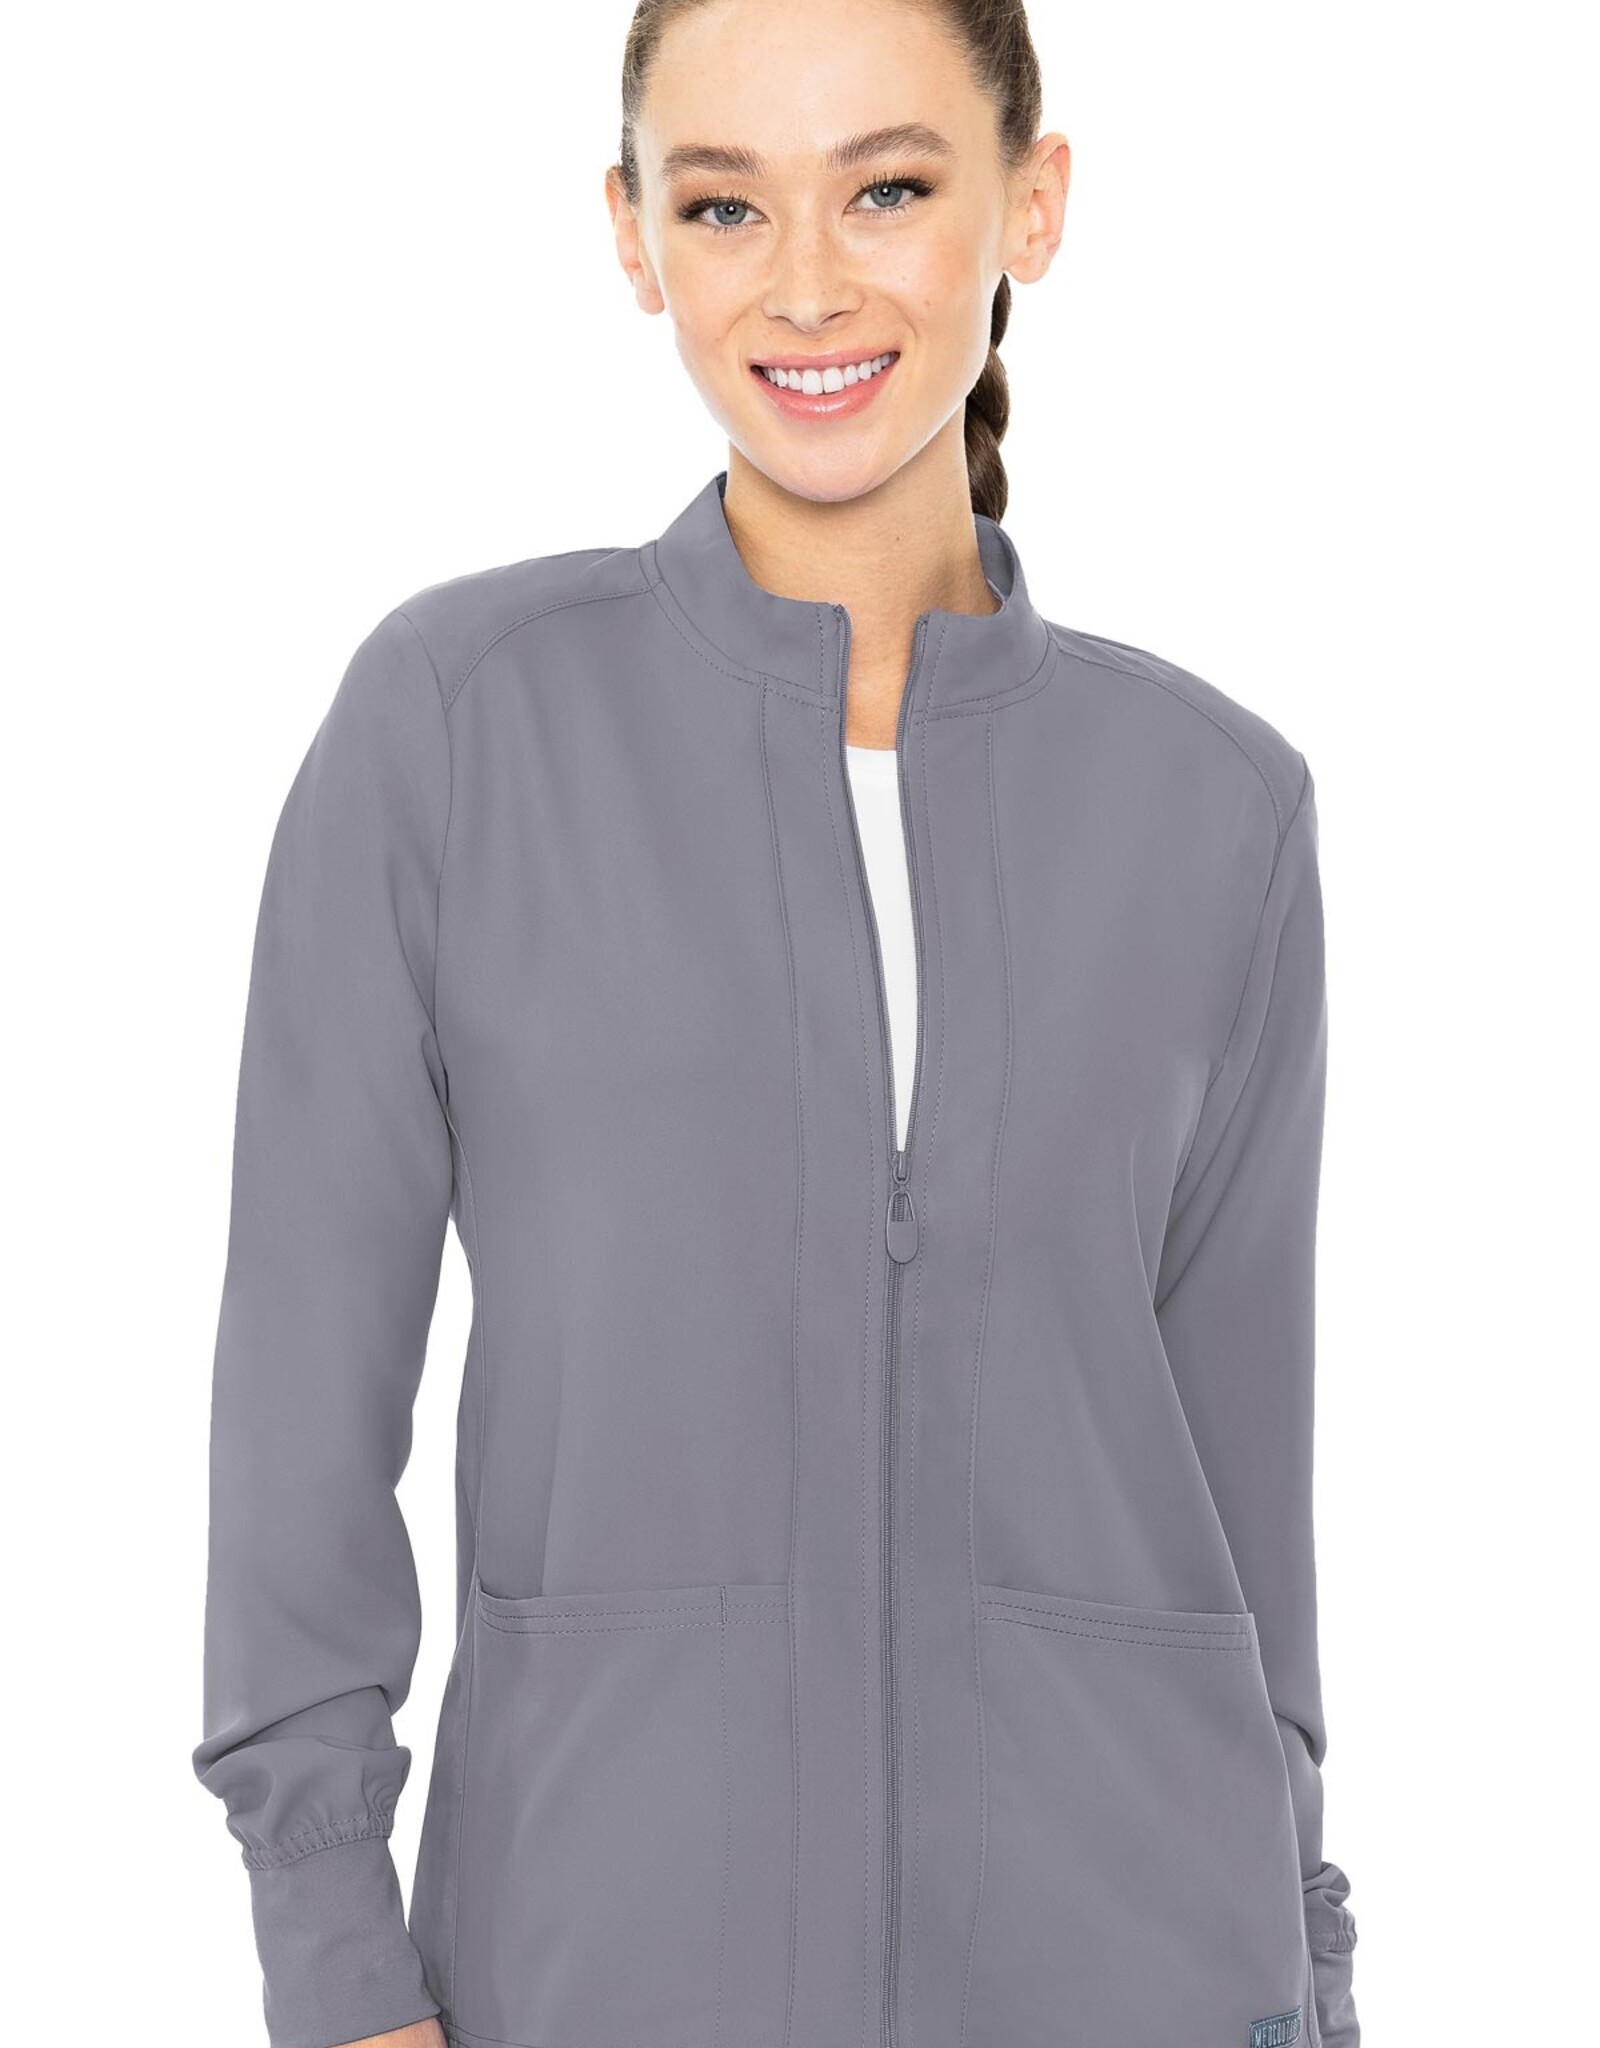 Med Couture Insight Women'sFront pocket Warm Up (Plus)